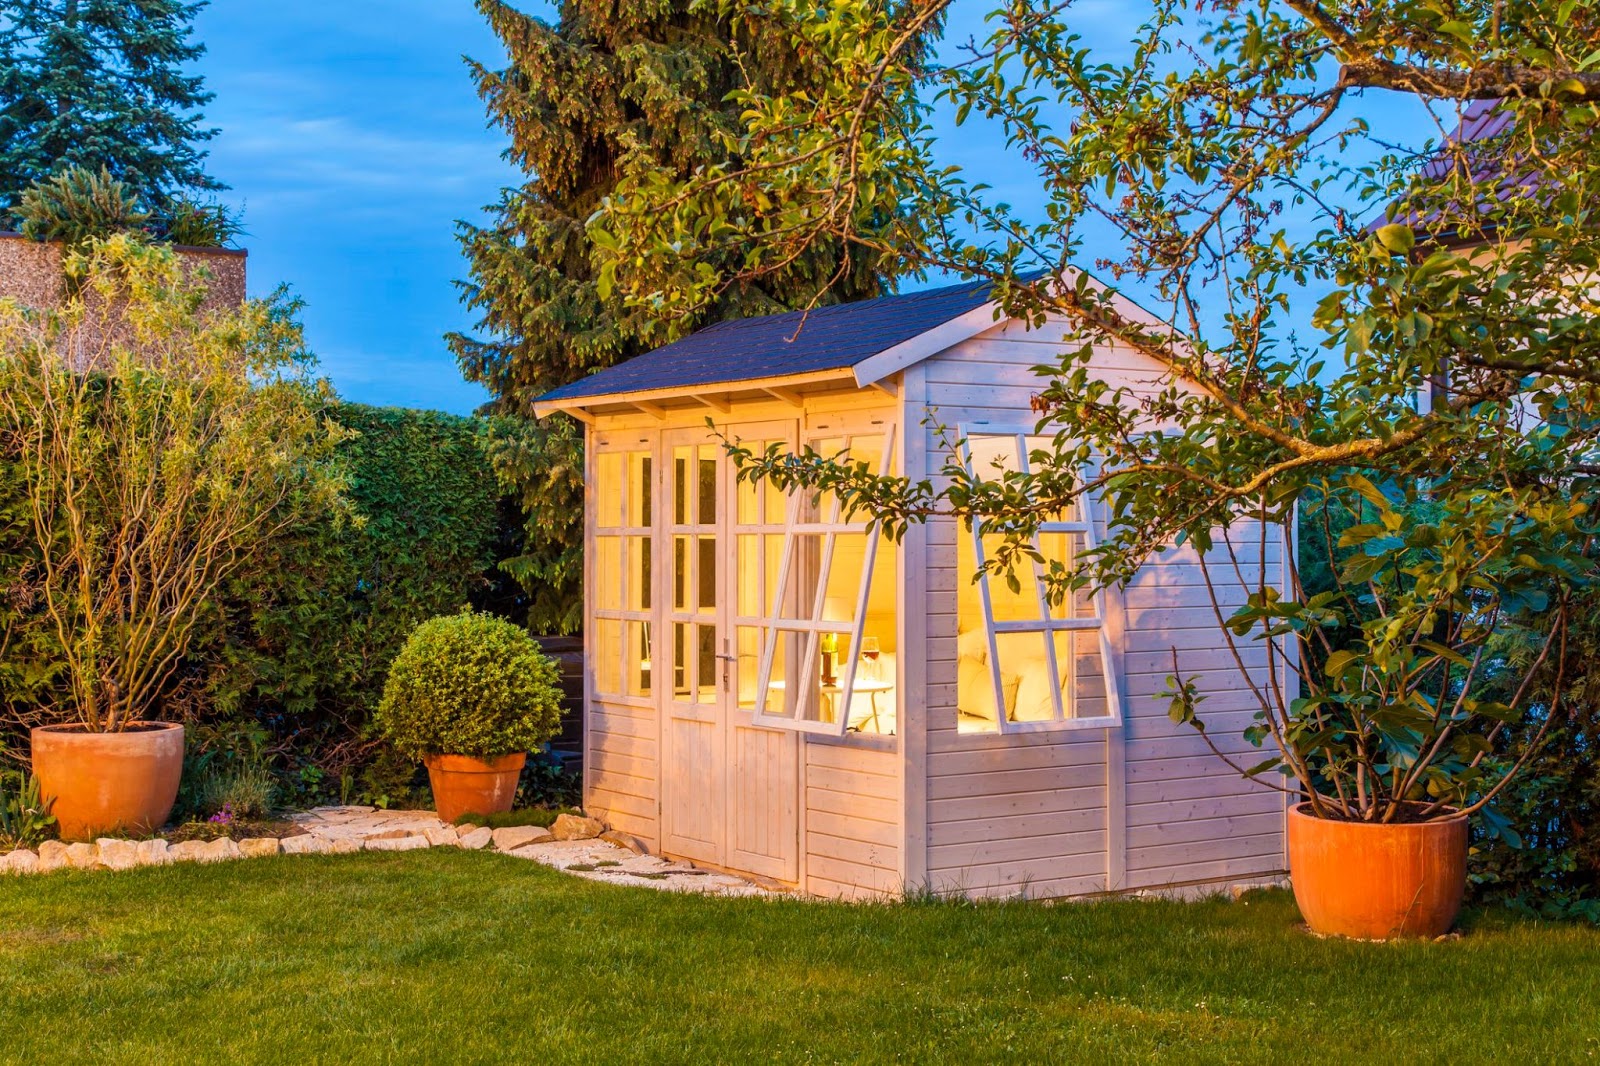 5 Garden Shed Ideas for Small Home Gardens: Tools, Gardening Supplies, and More